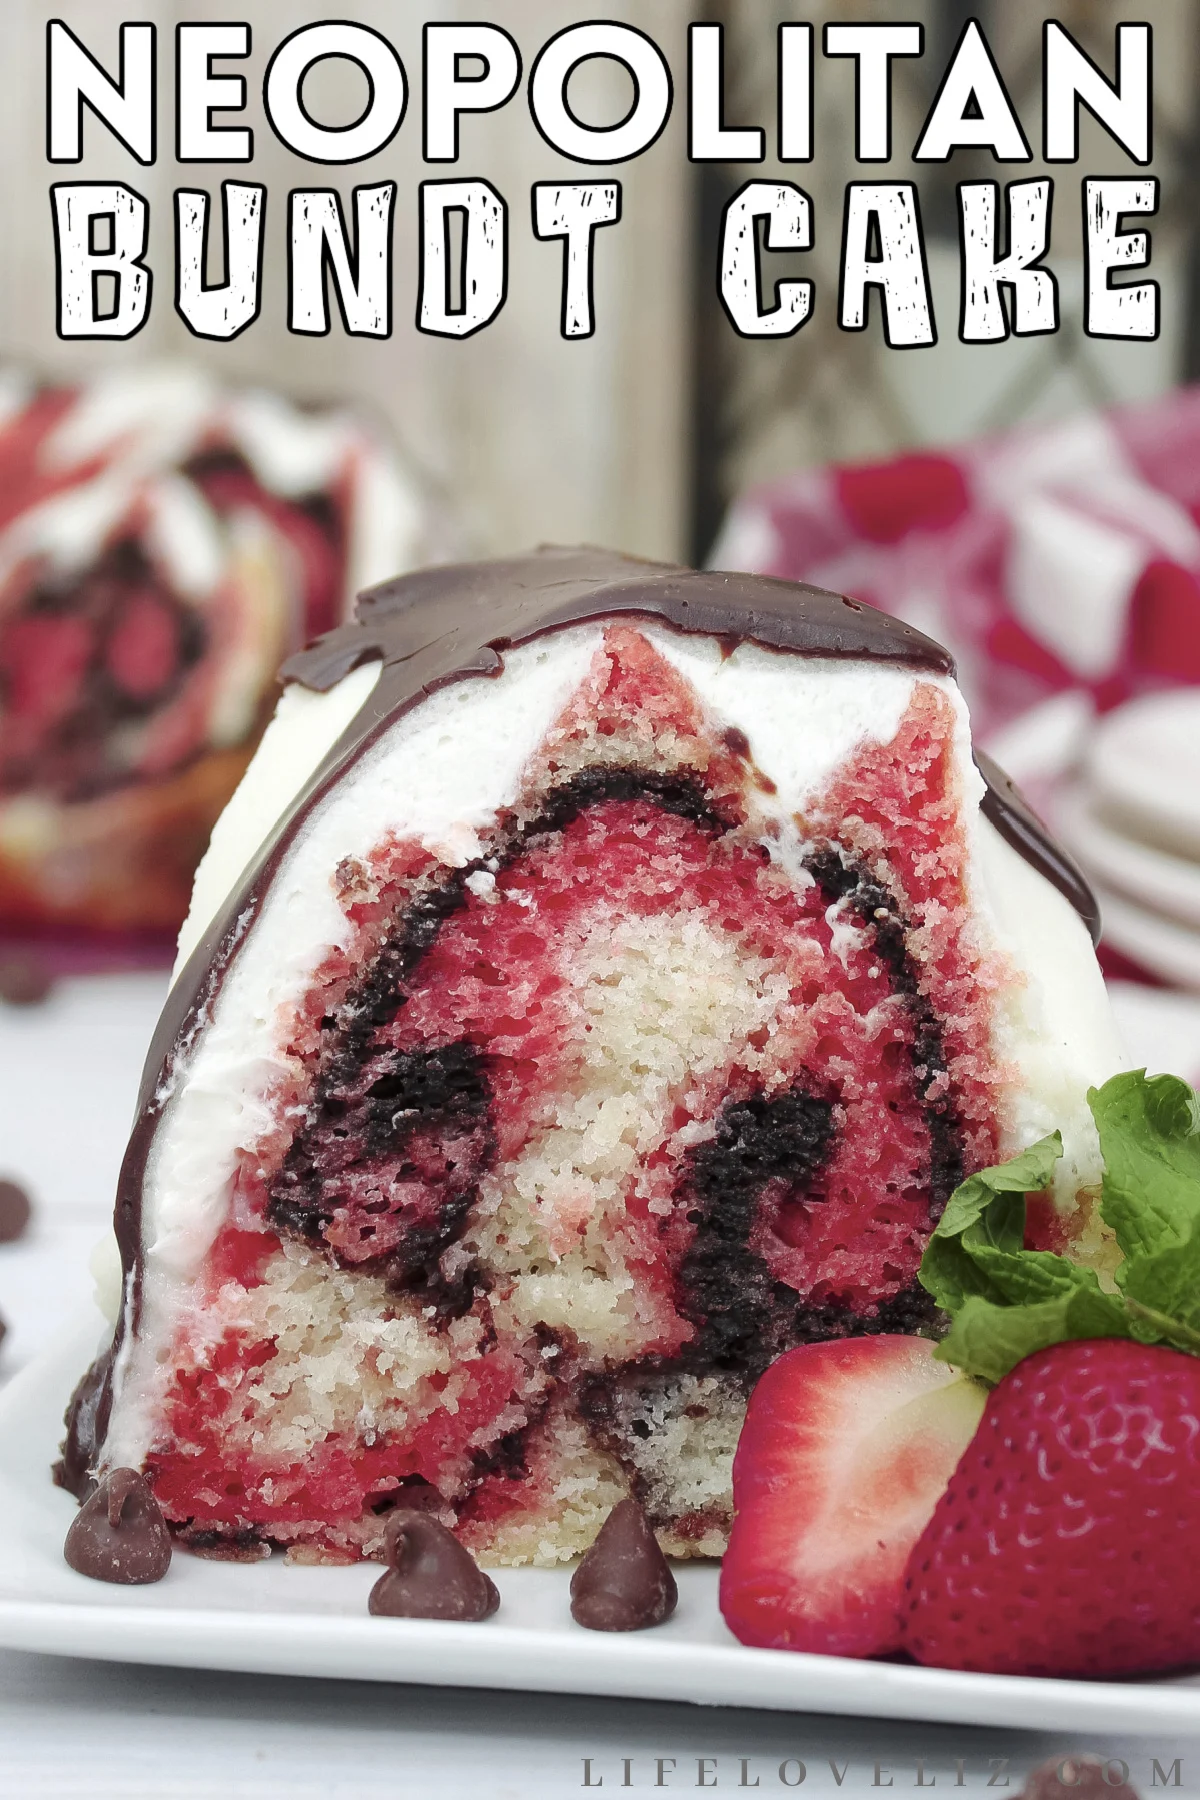 Bake this delicious and easy-to-make Neapolitan Bundt cake with a vanilla glaze, all topped off with chocolate ganache for extra decadence.